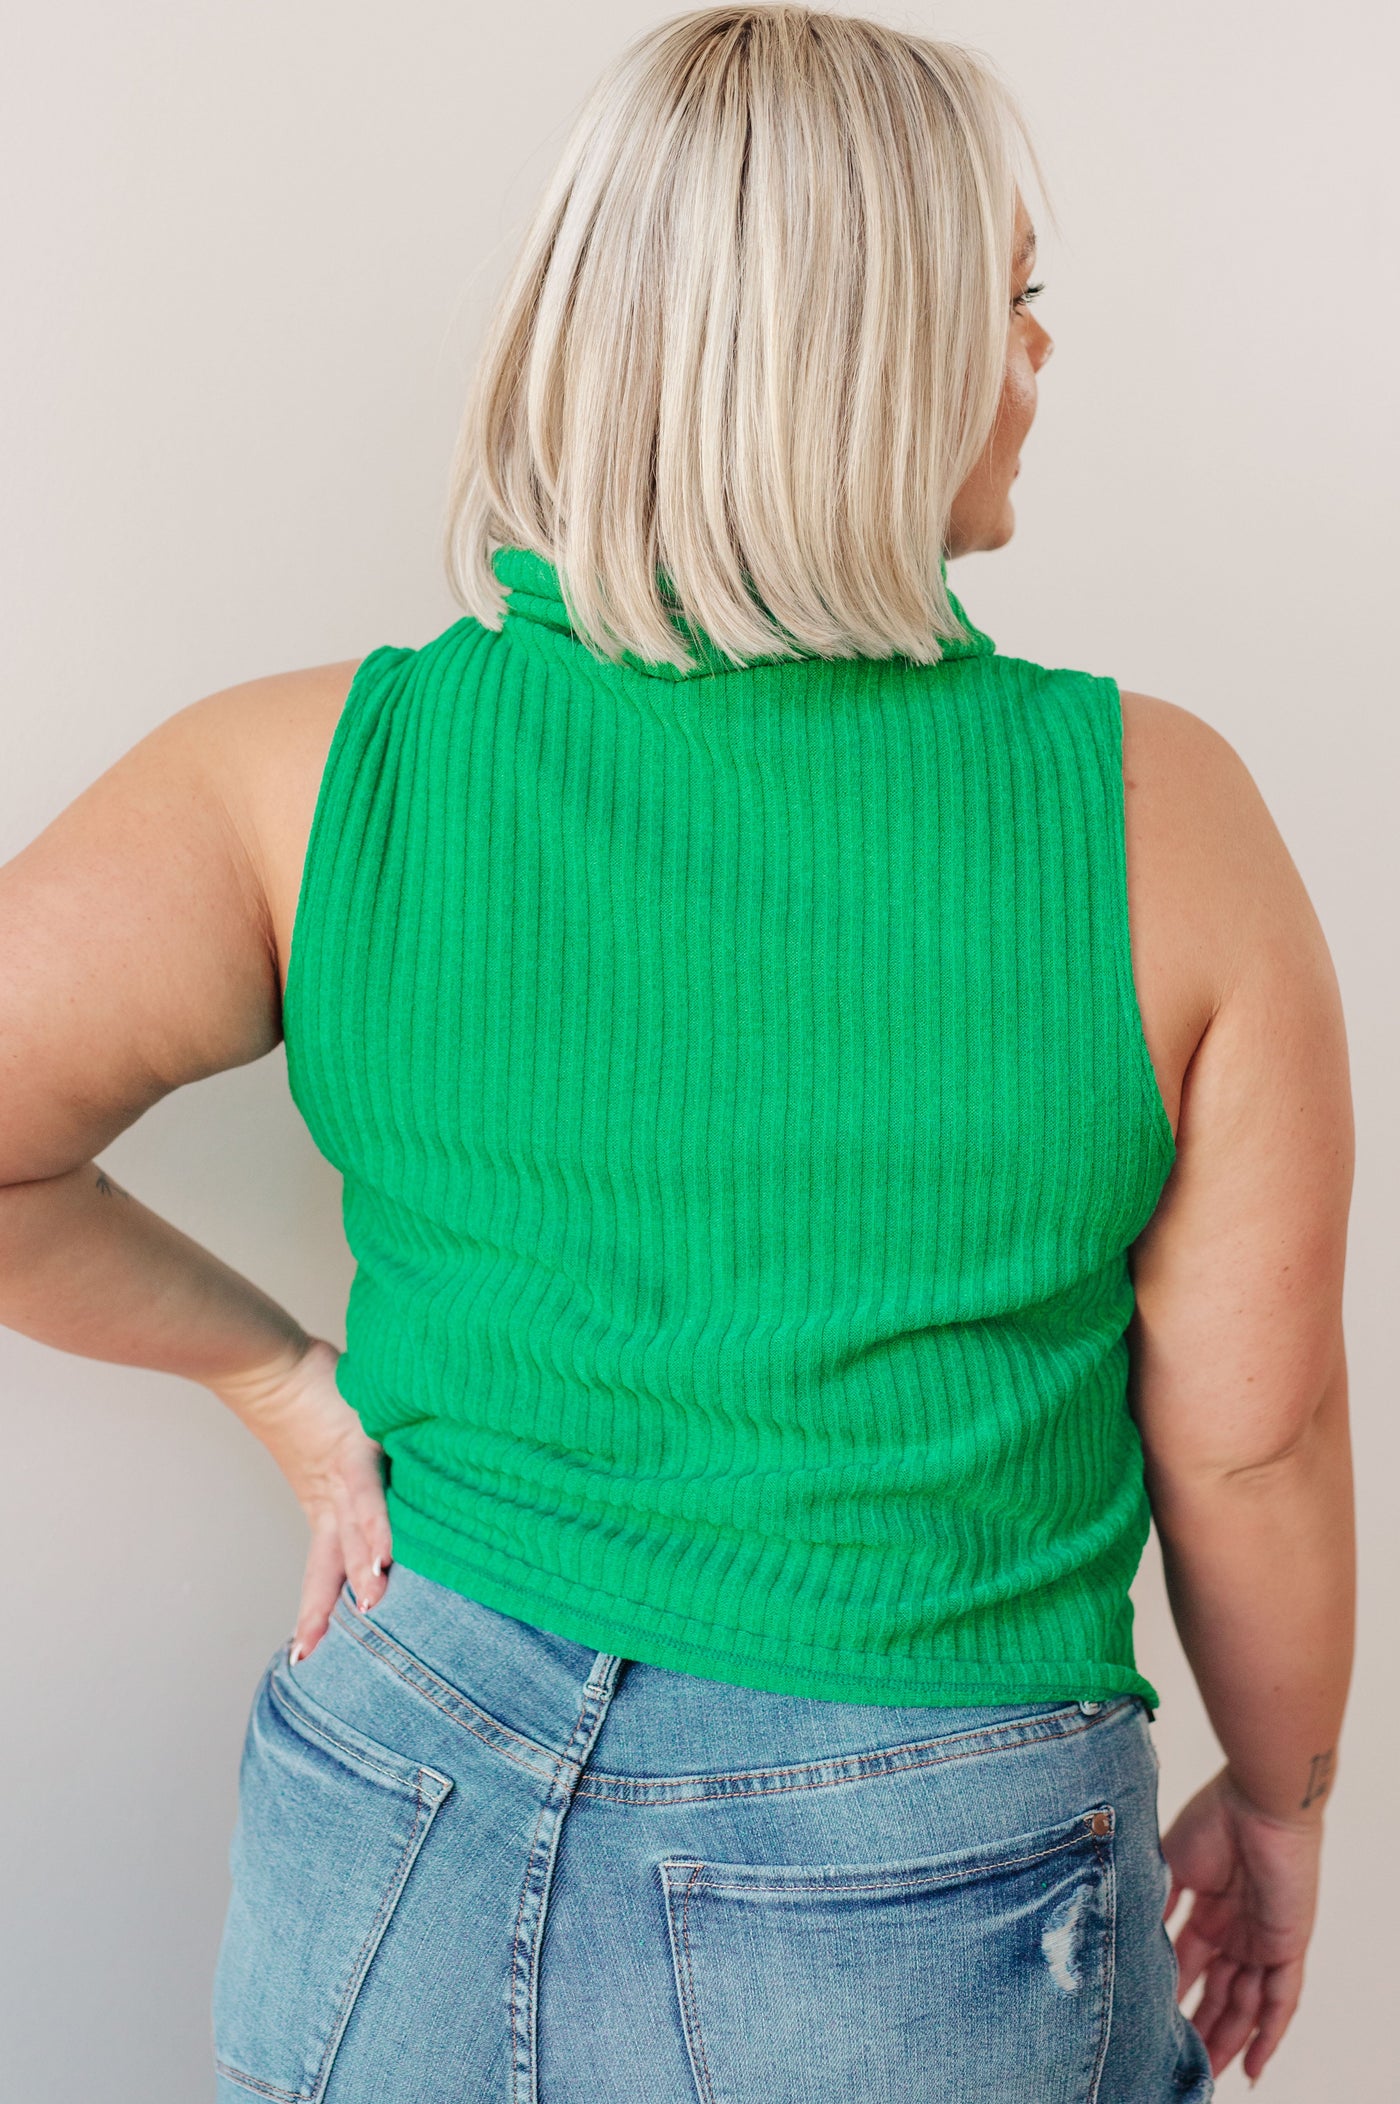 Experience warmth and style with our Before You Go Sleeveless Turtleneck Sweater. Made with a ribbed knit, this turtleneck sweater is perfect for layering and adding a touch of color to any outfit